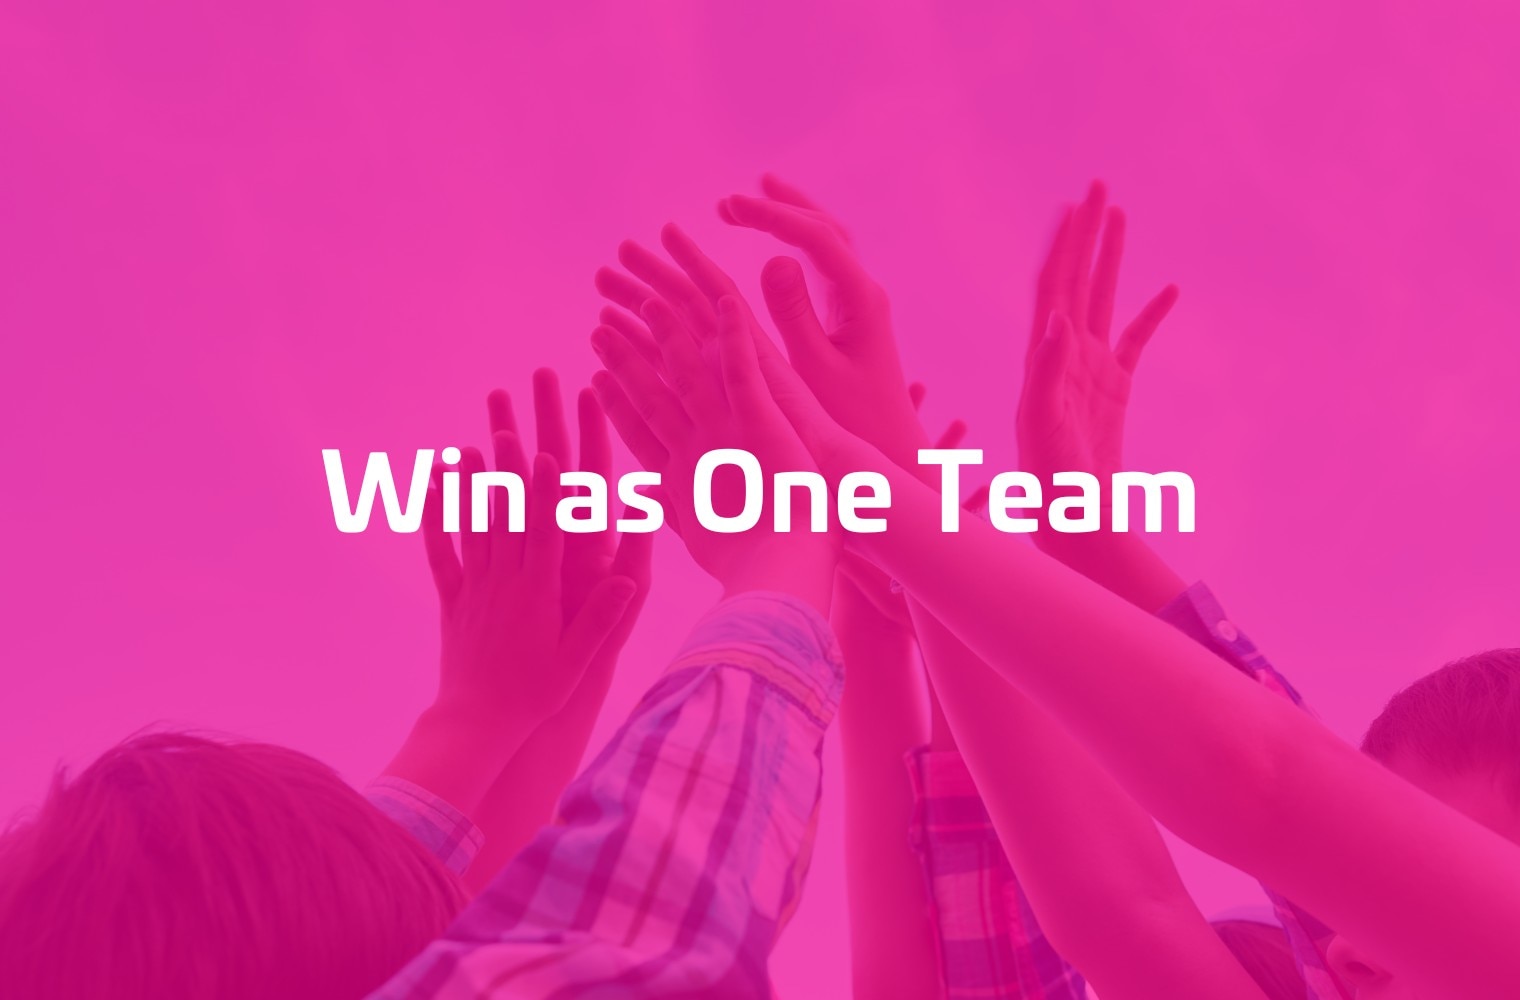 Picture of hands high-fiving with pink gradient on top. Caption reads: Win as One Team